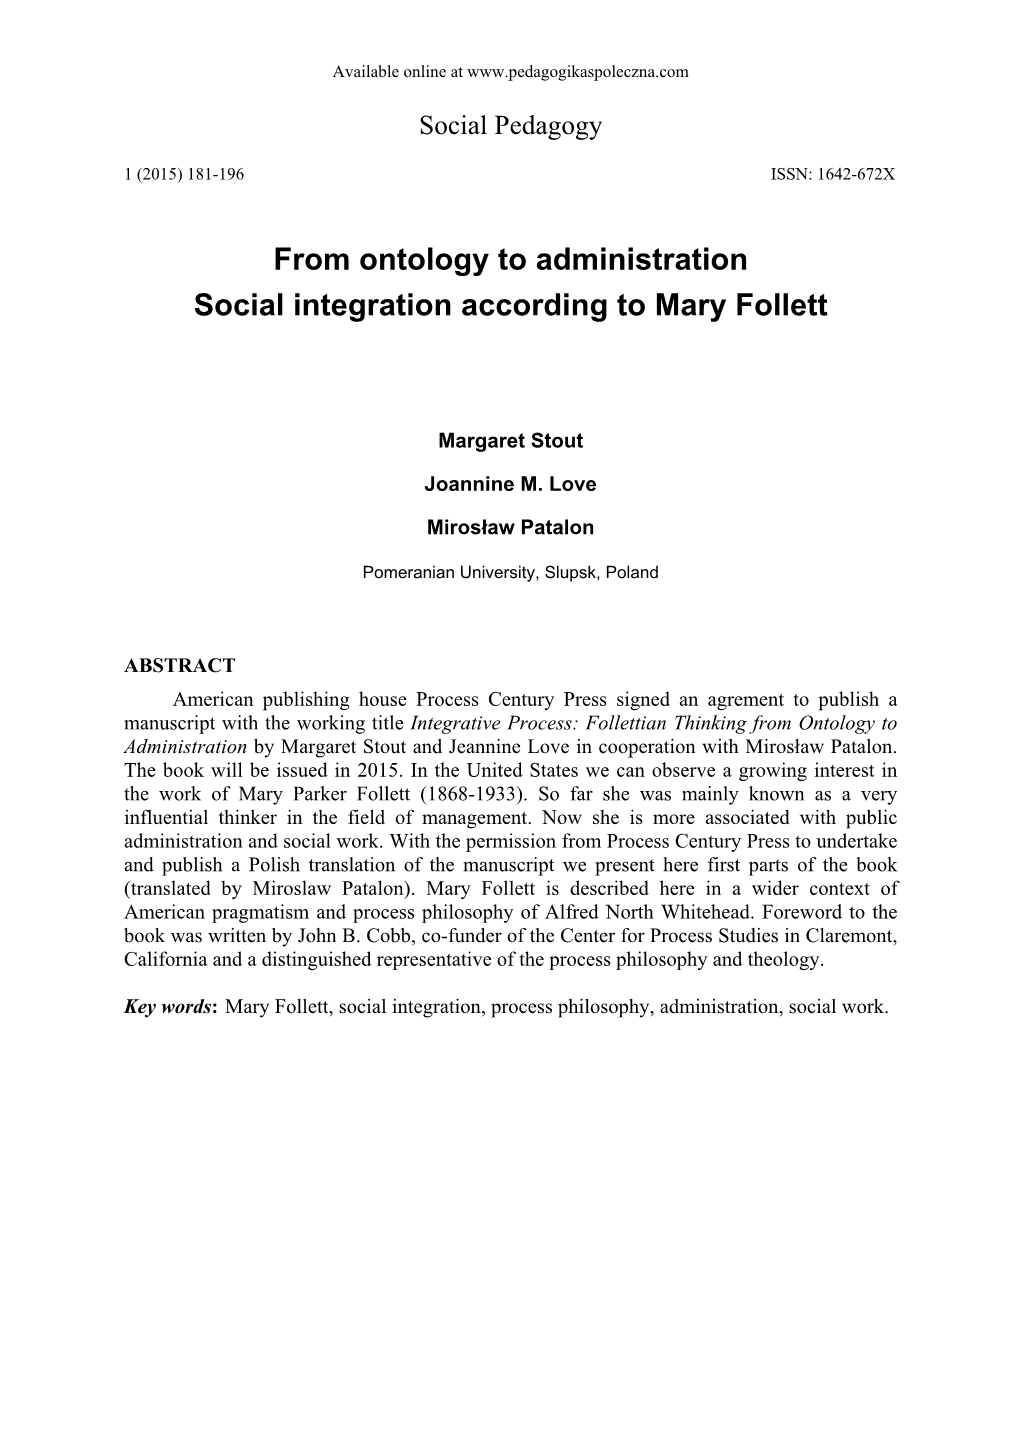 From Ontology to Administration Social Integration According to Mary Follett